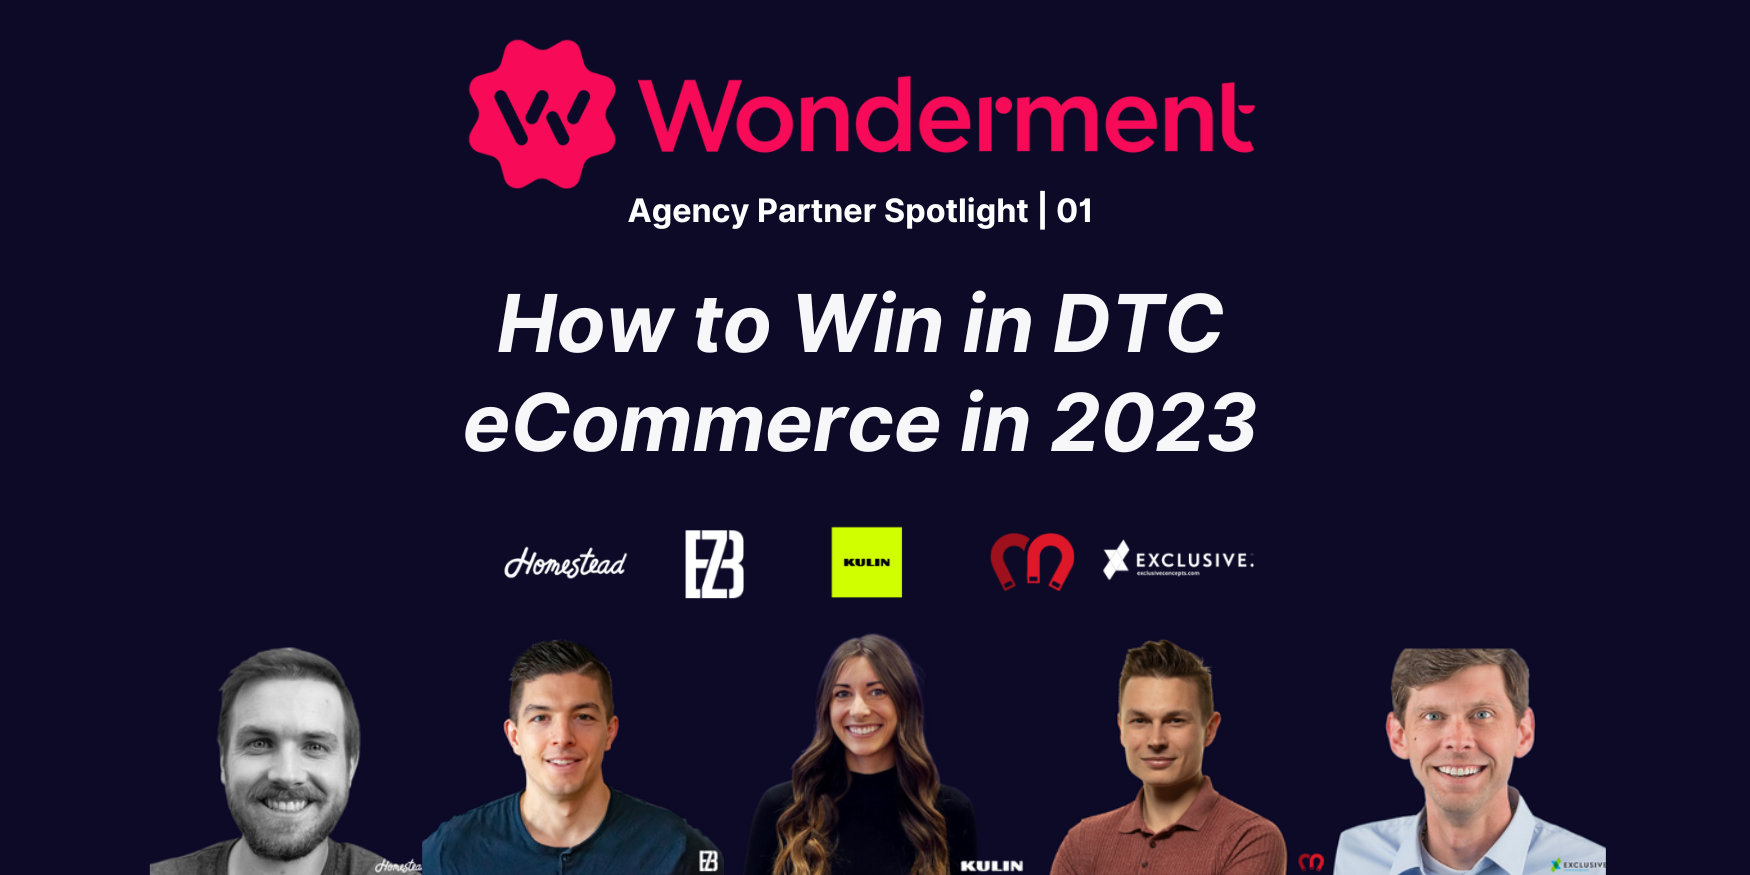 How to Win in DTC eCommerce in 2023